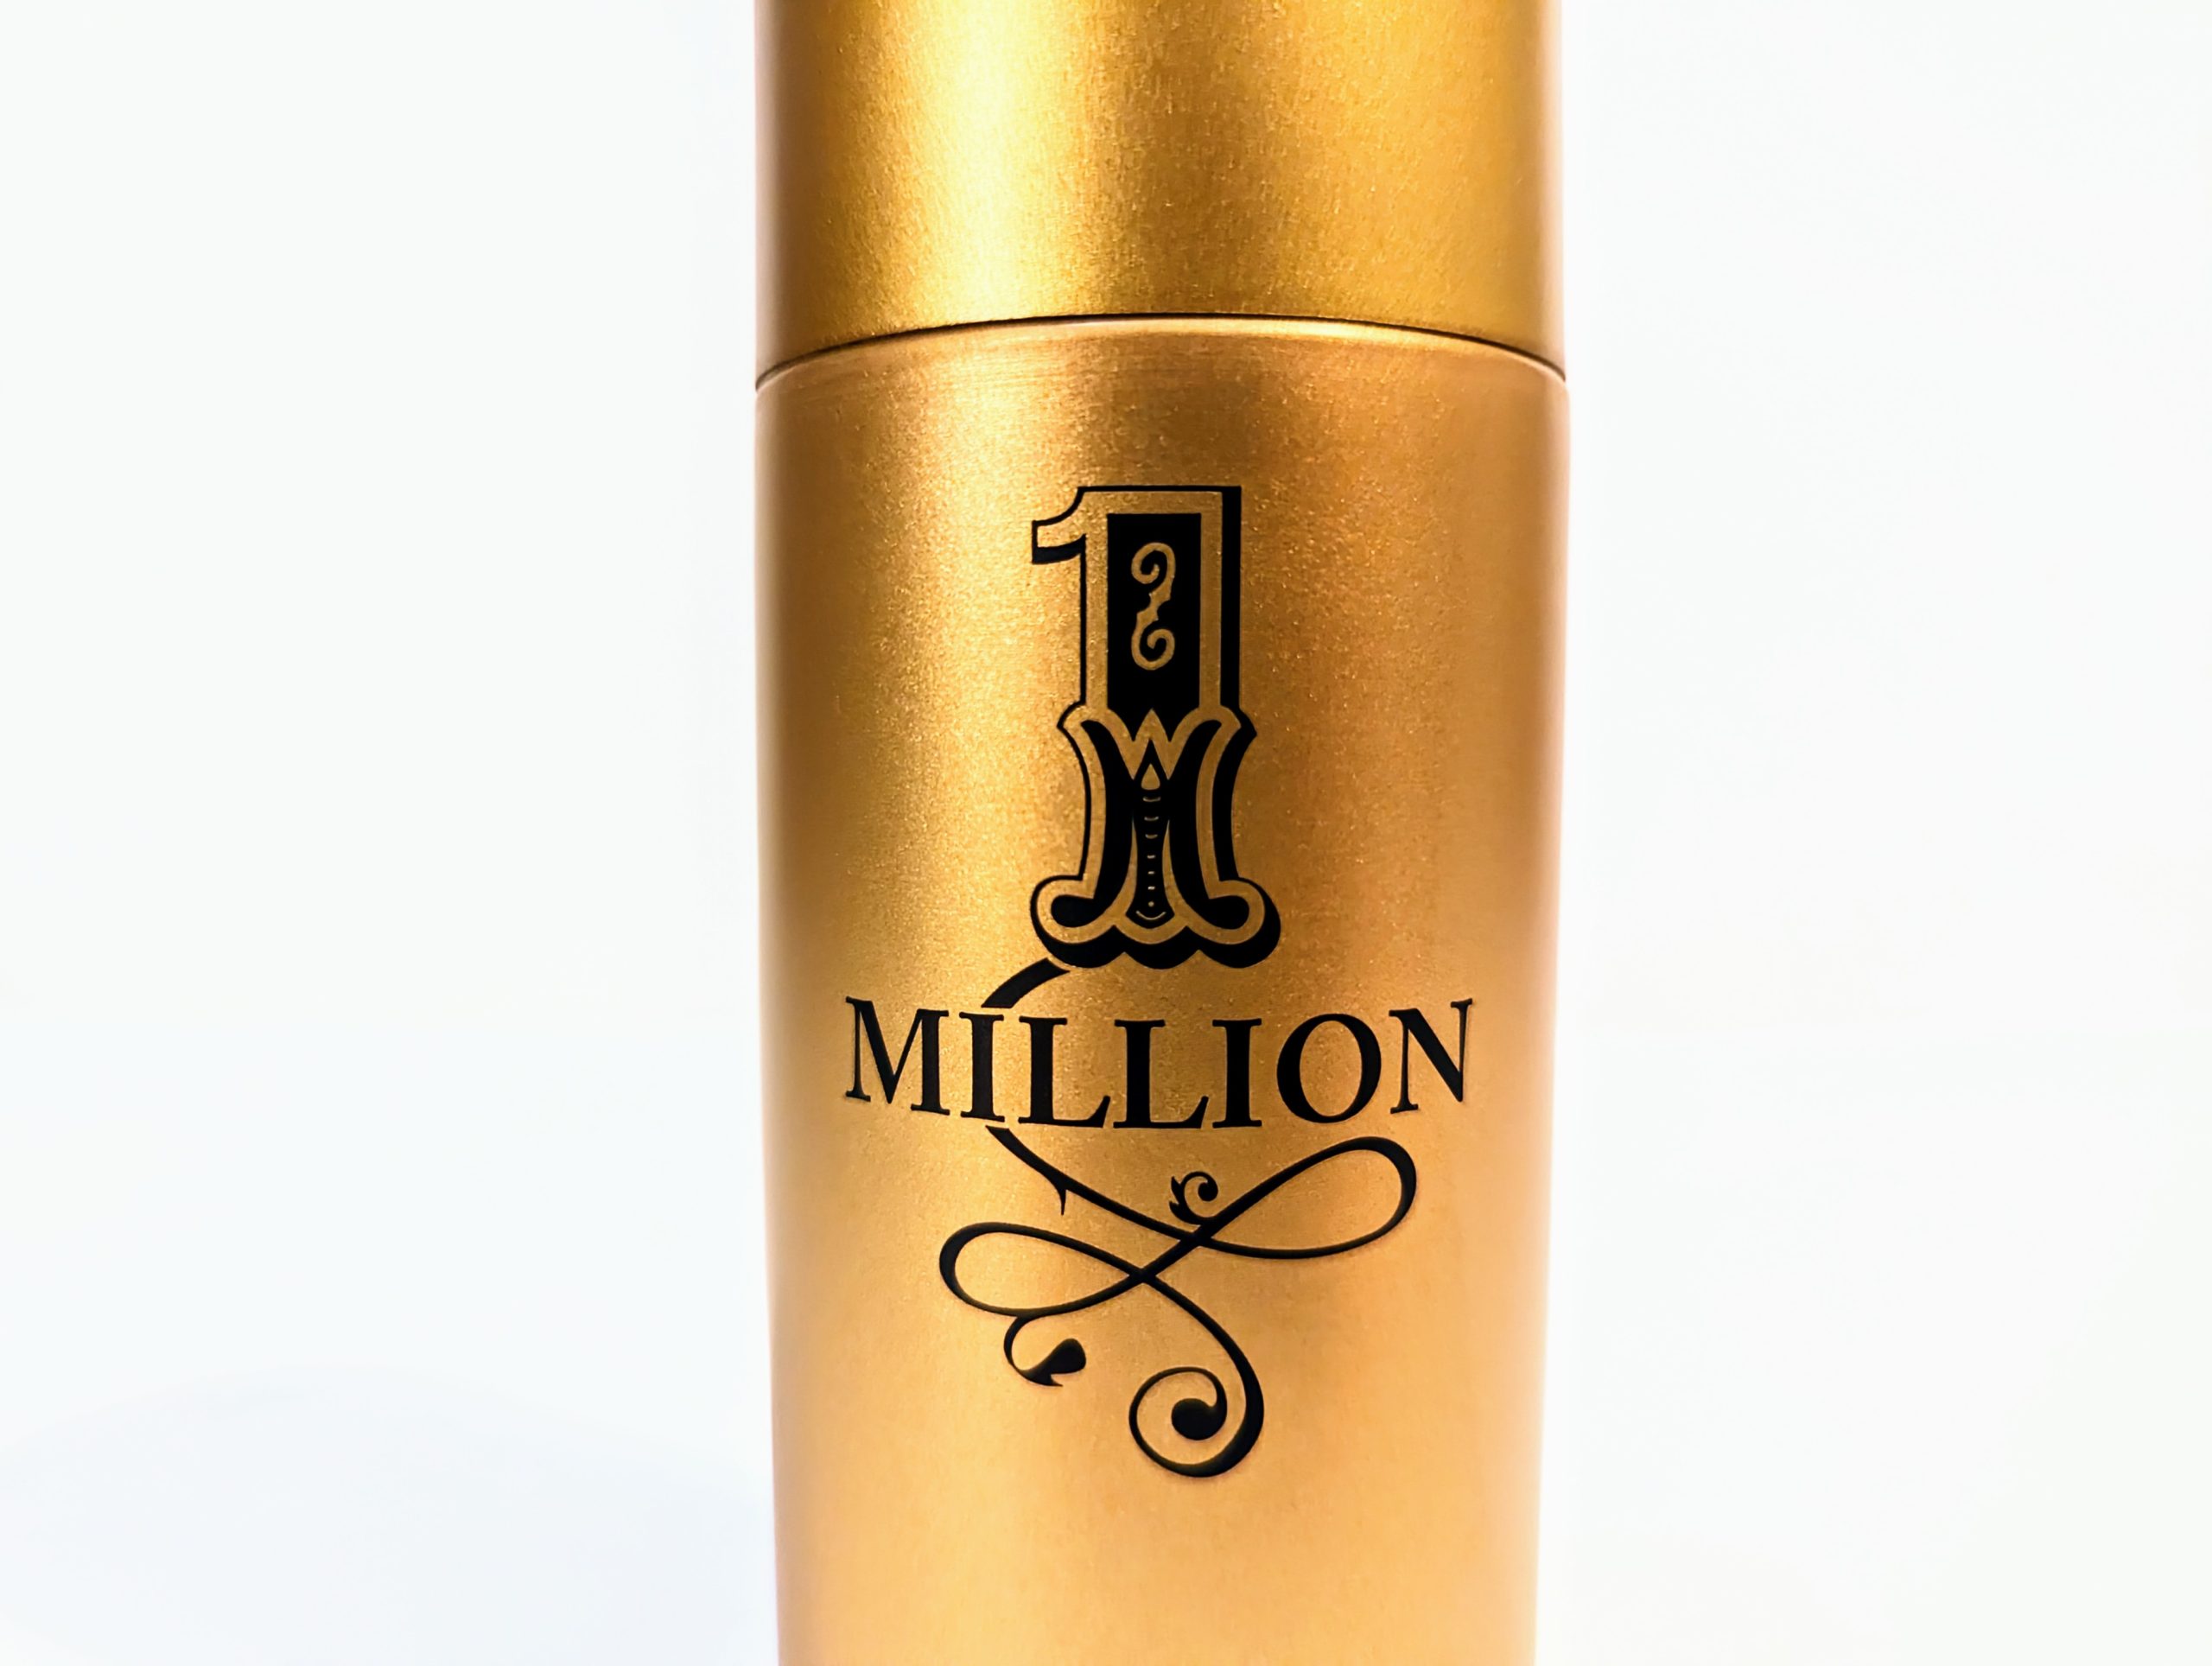 A gold-colored spray bottle labeled “1 Million” with an ornate design on the front.